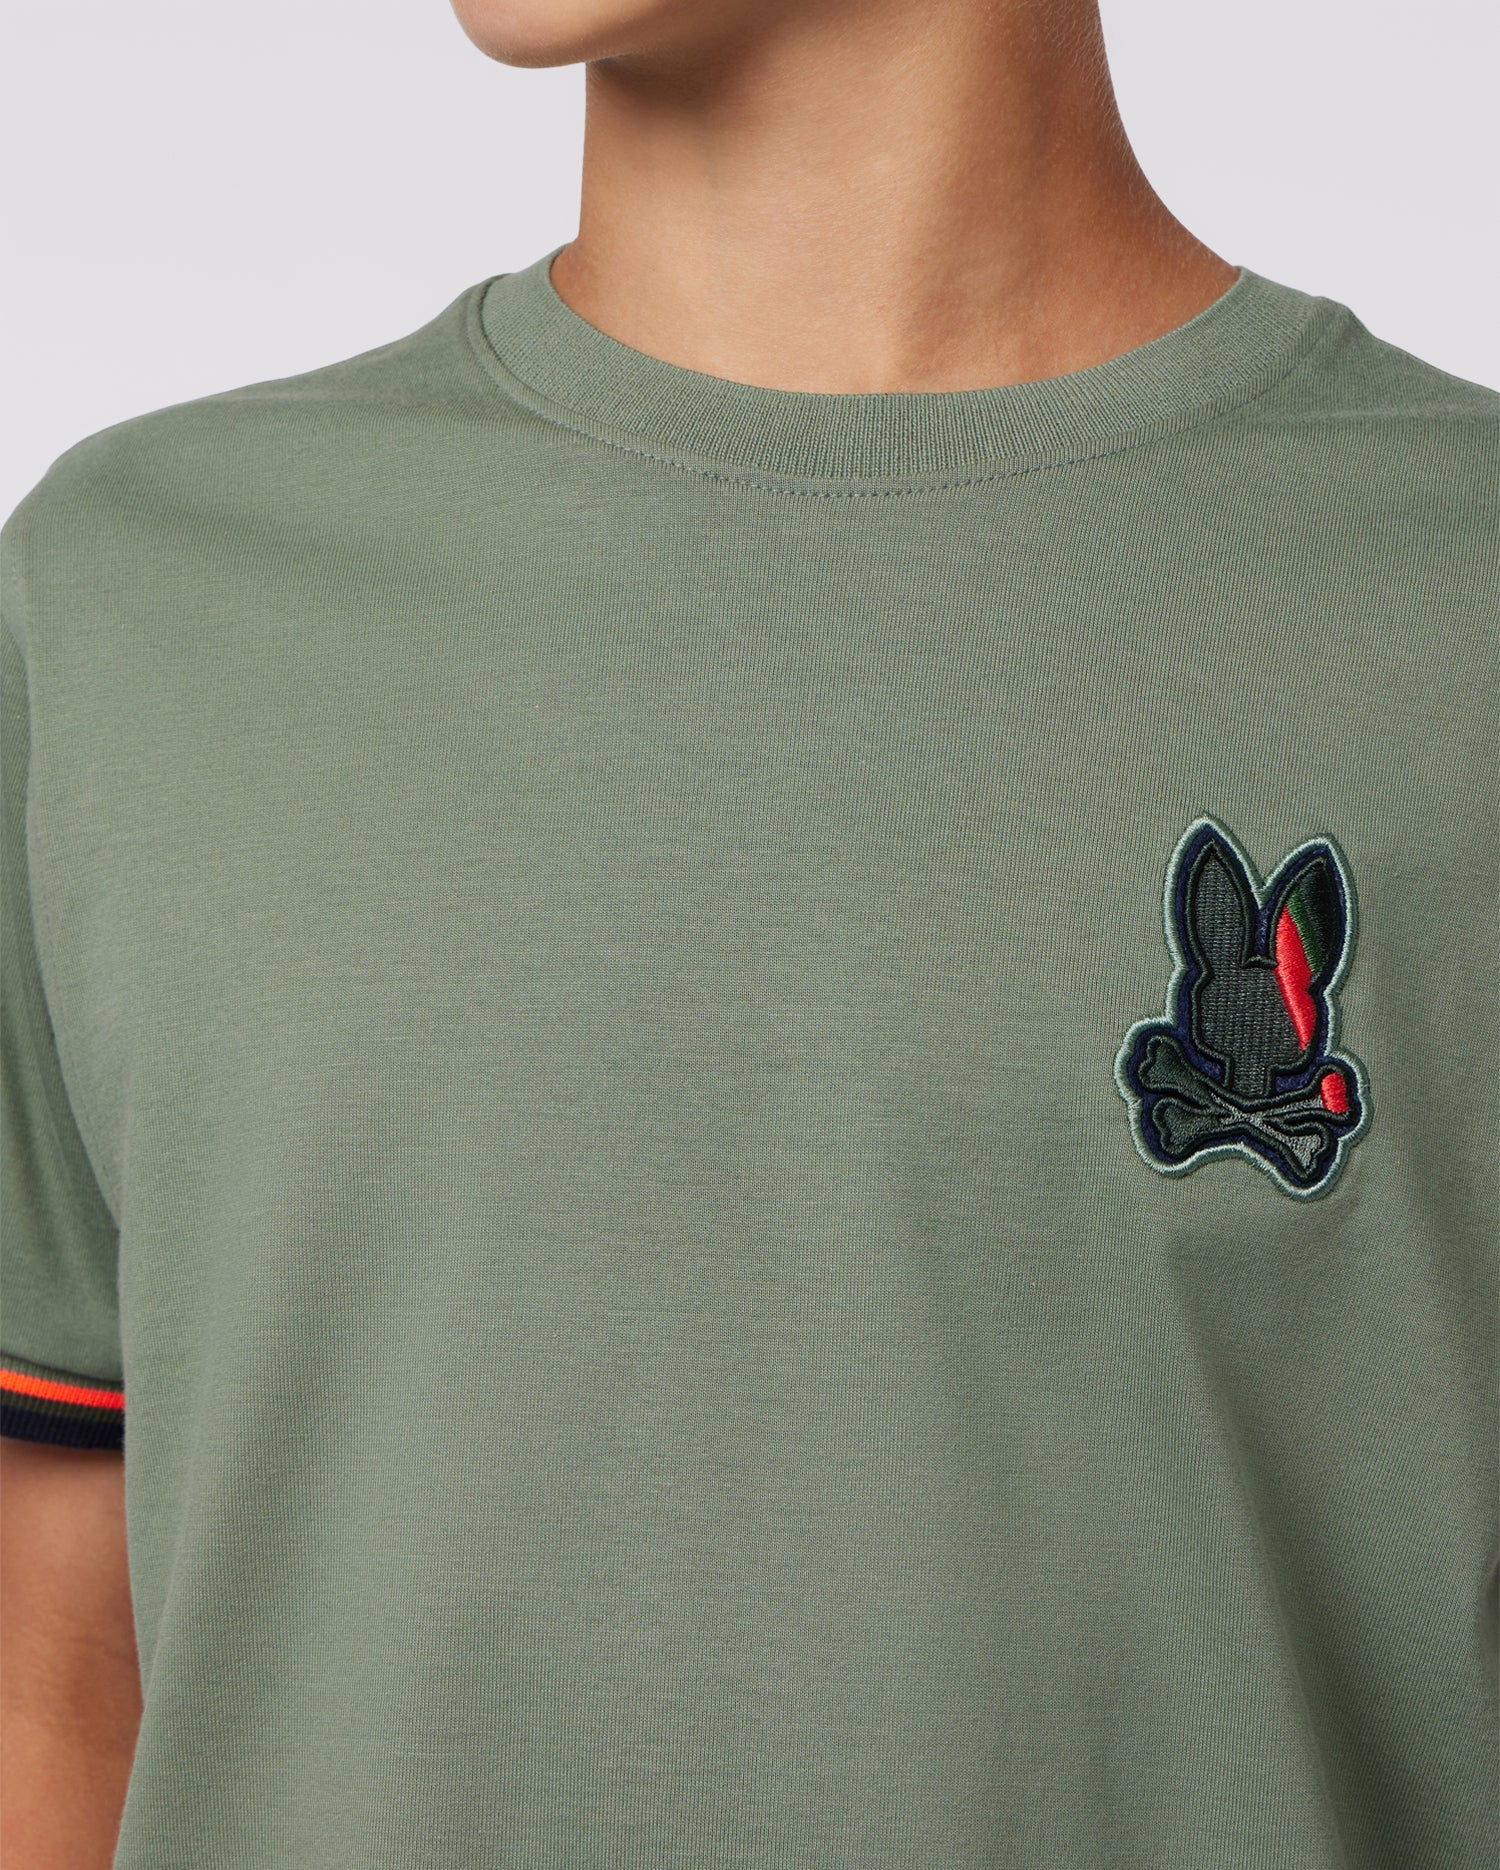 KIDS GREEN APPLE VALLEY EMBROIDERED FASHION TEE | PSYCHO BUNNY 